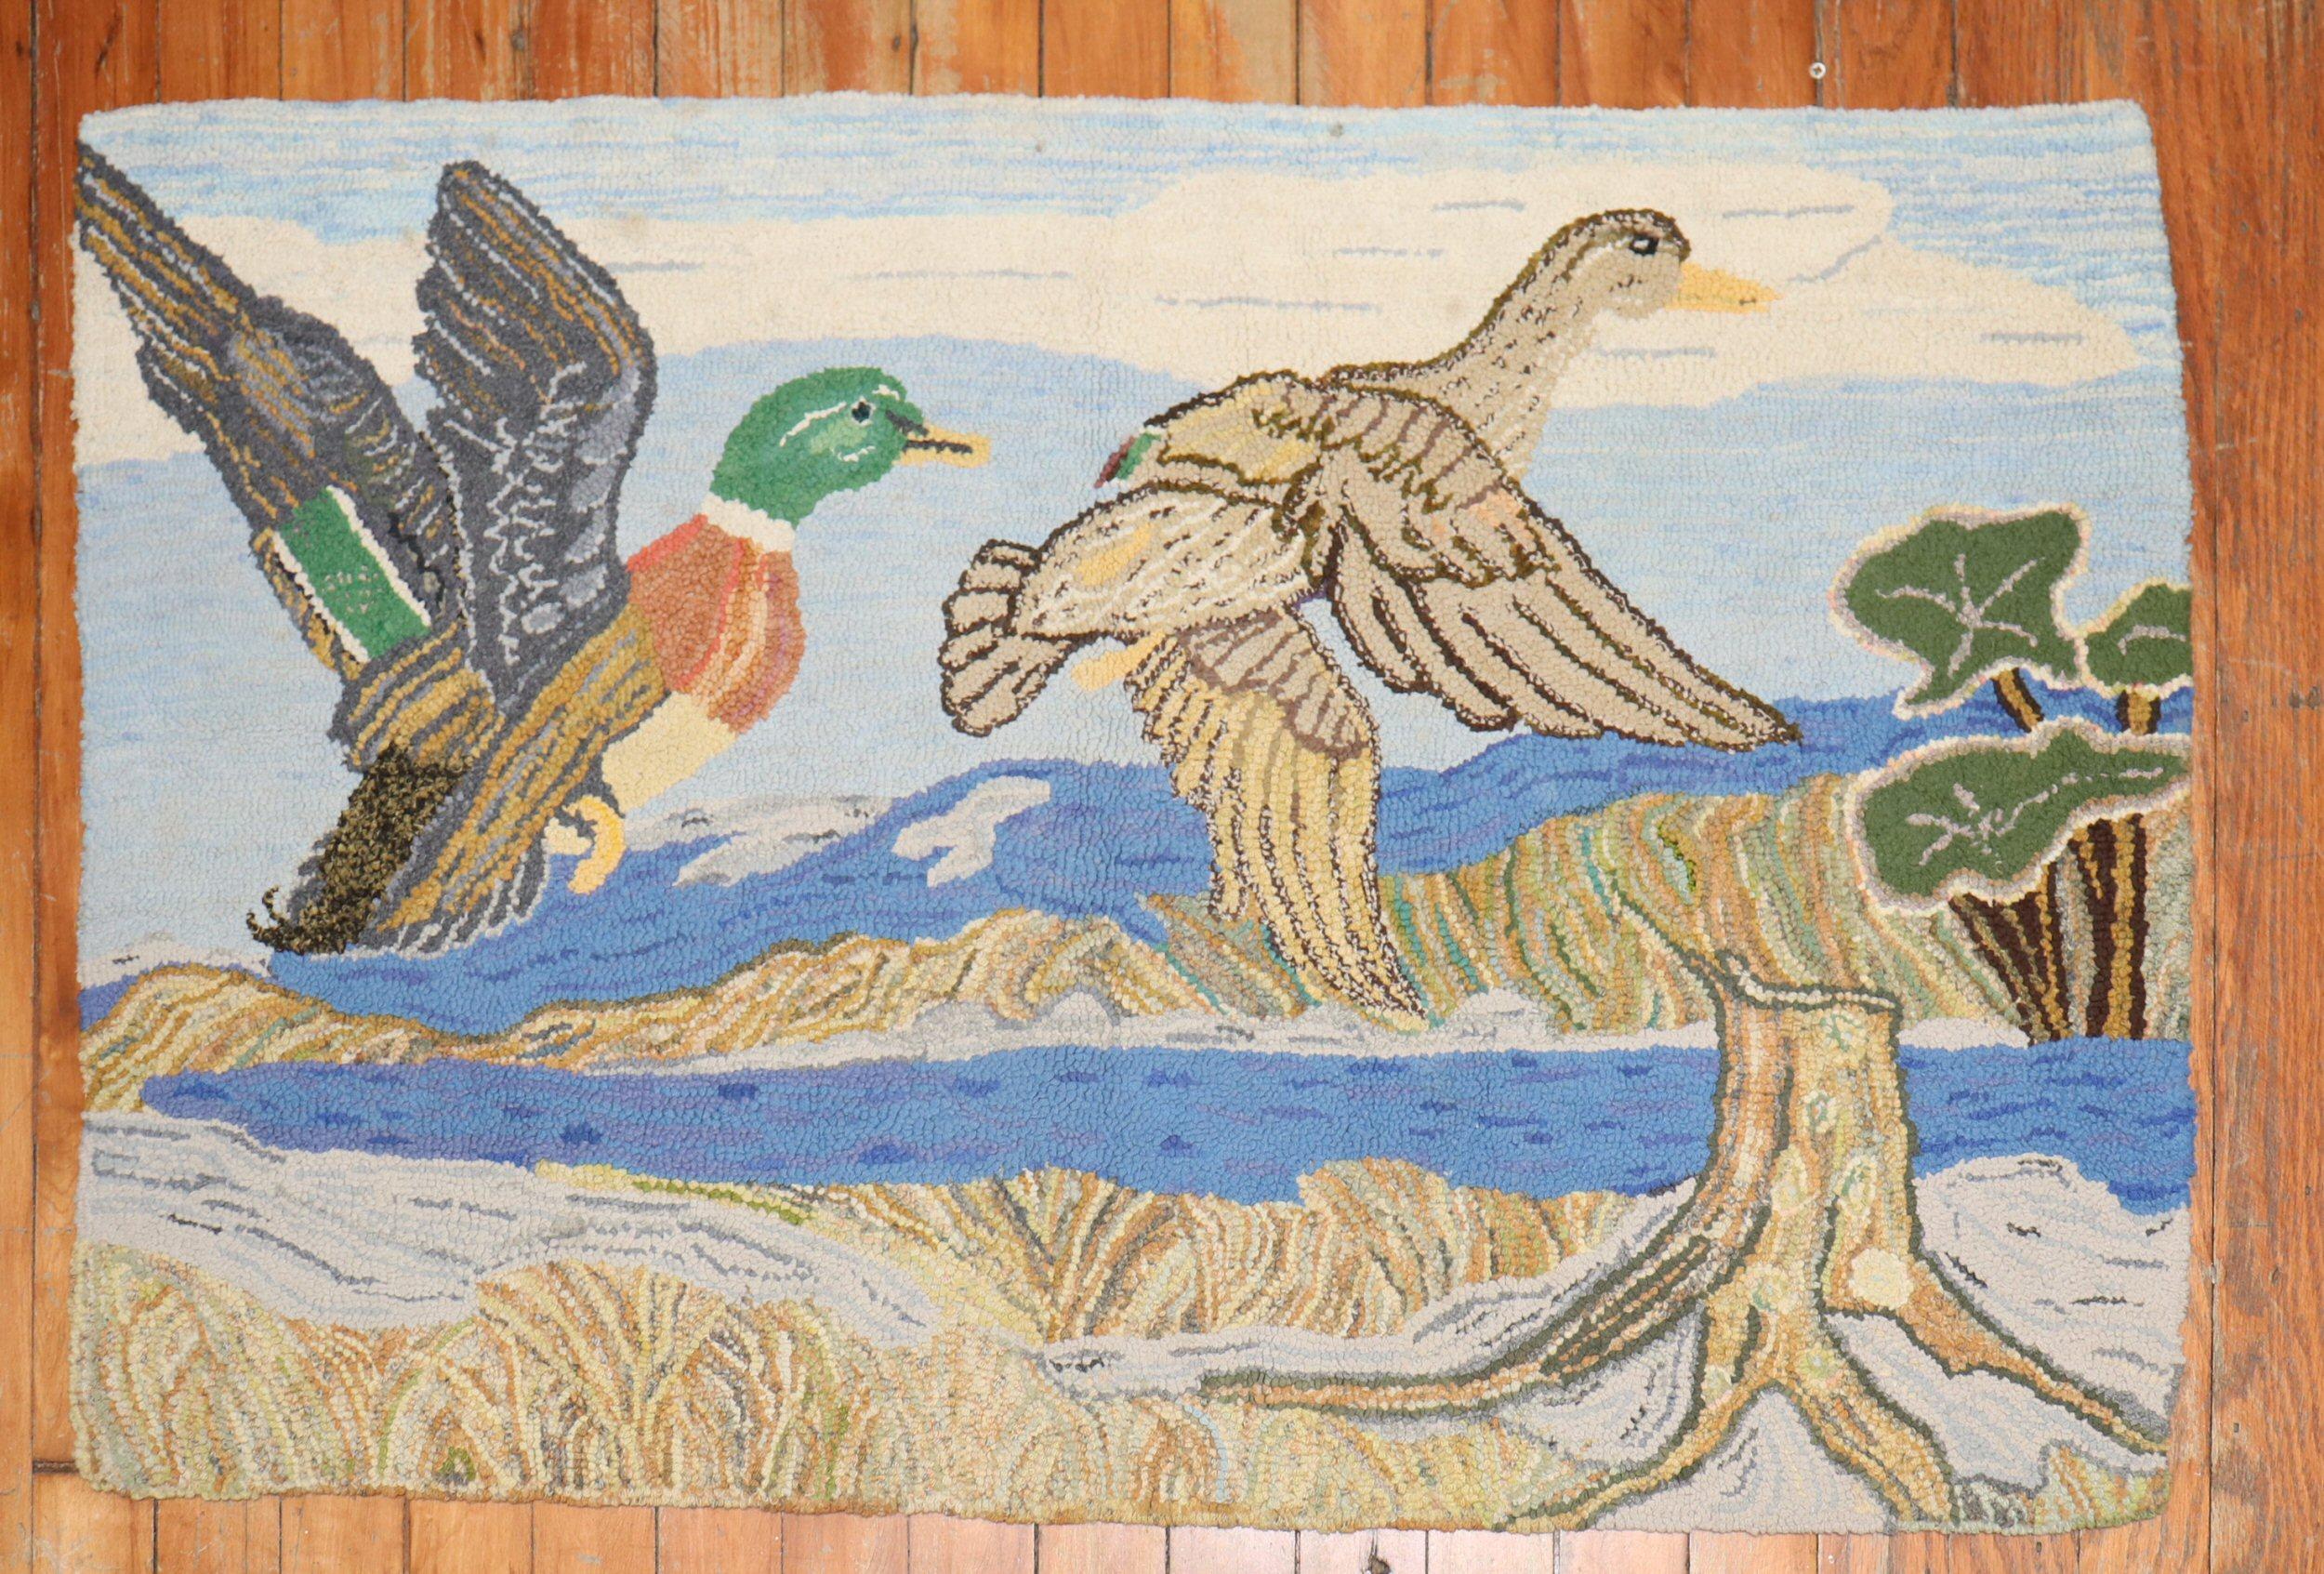 A handmade decorative American hooked rug from the middle of the 20th century depicting 2 ducks on a lively scenic view. The condition is really nice. No stains, no tears, has been professionally cleaned.

Measures: 24'' x 37''.